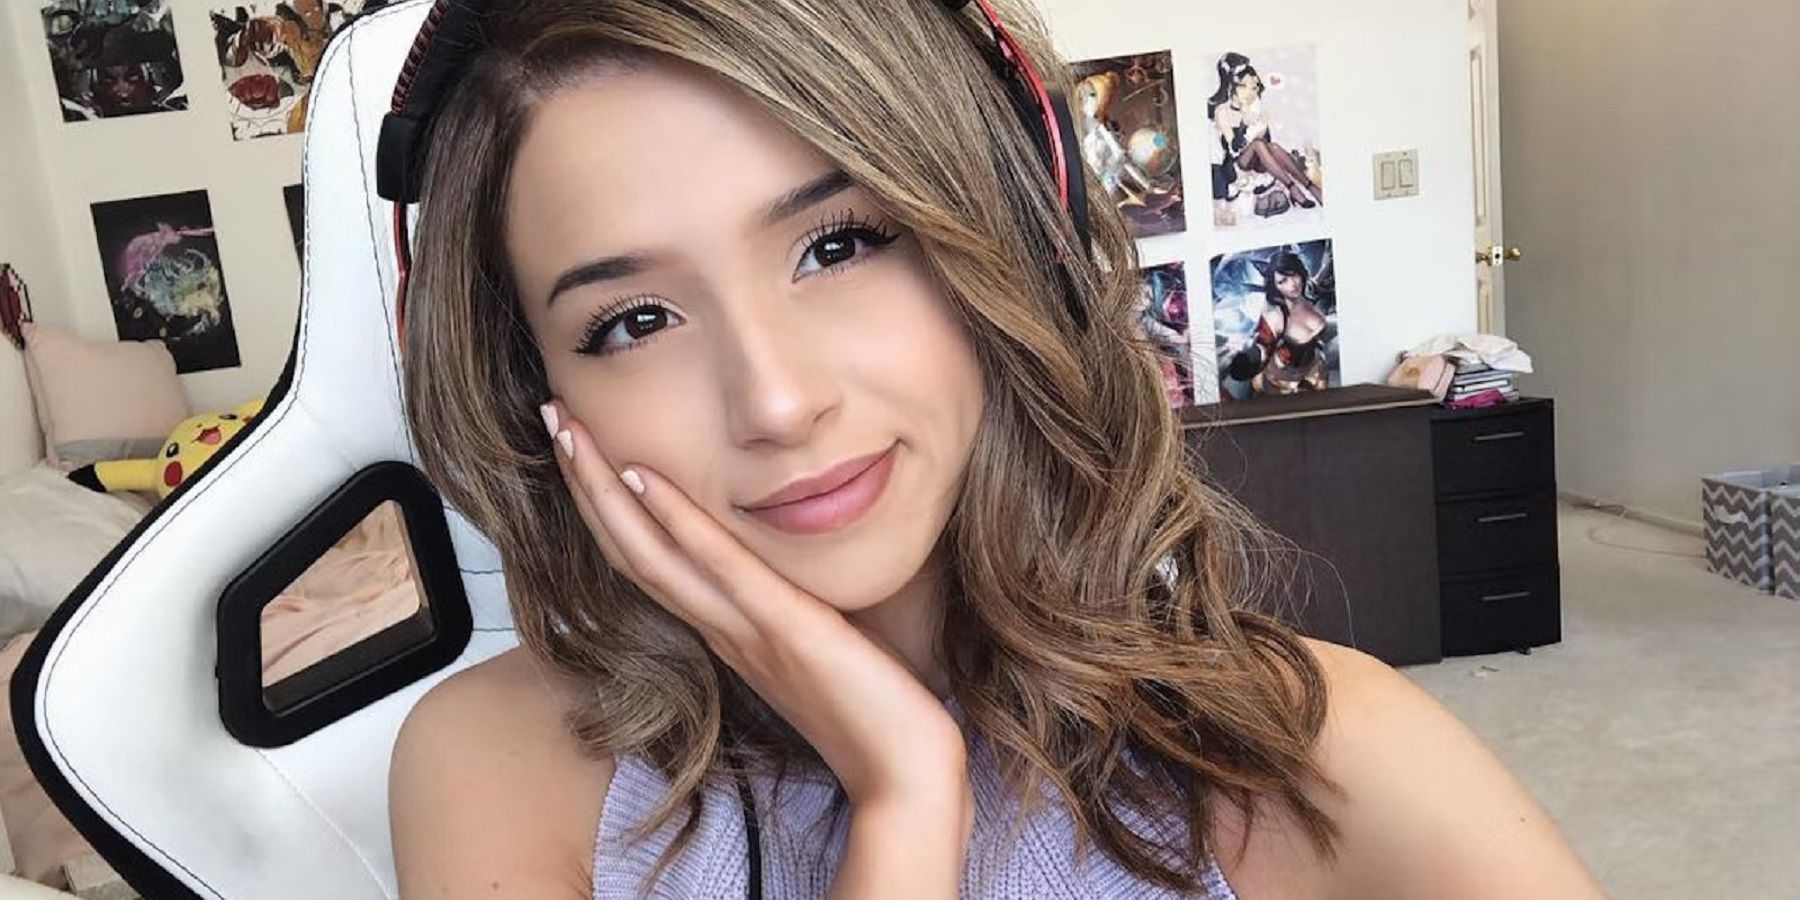 Who is Pokimane? (Age, Height, Birthday, Income, Net Worth)